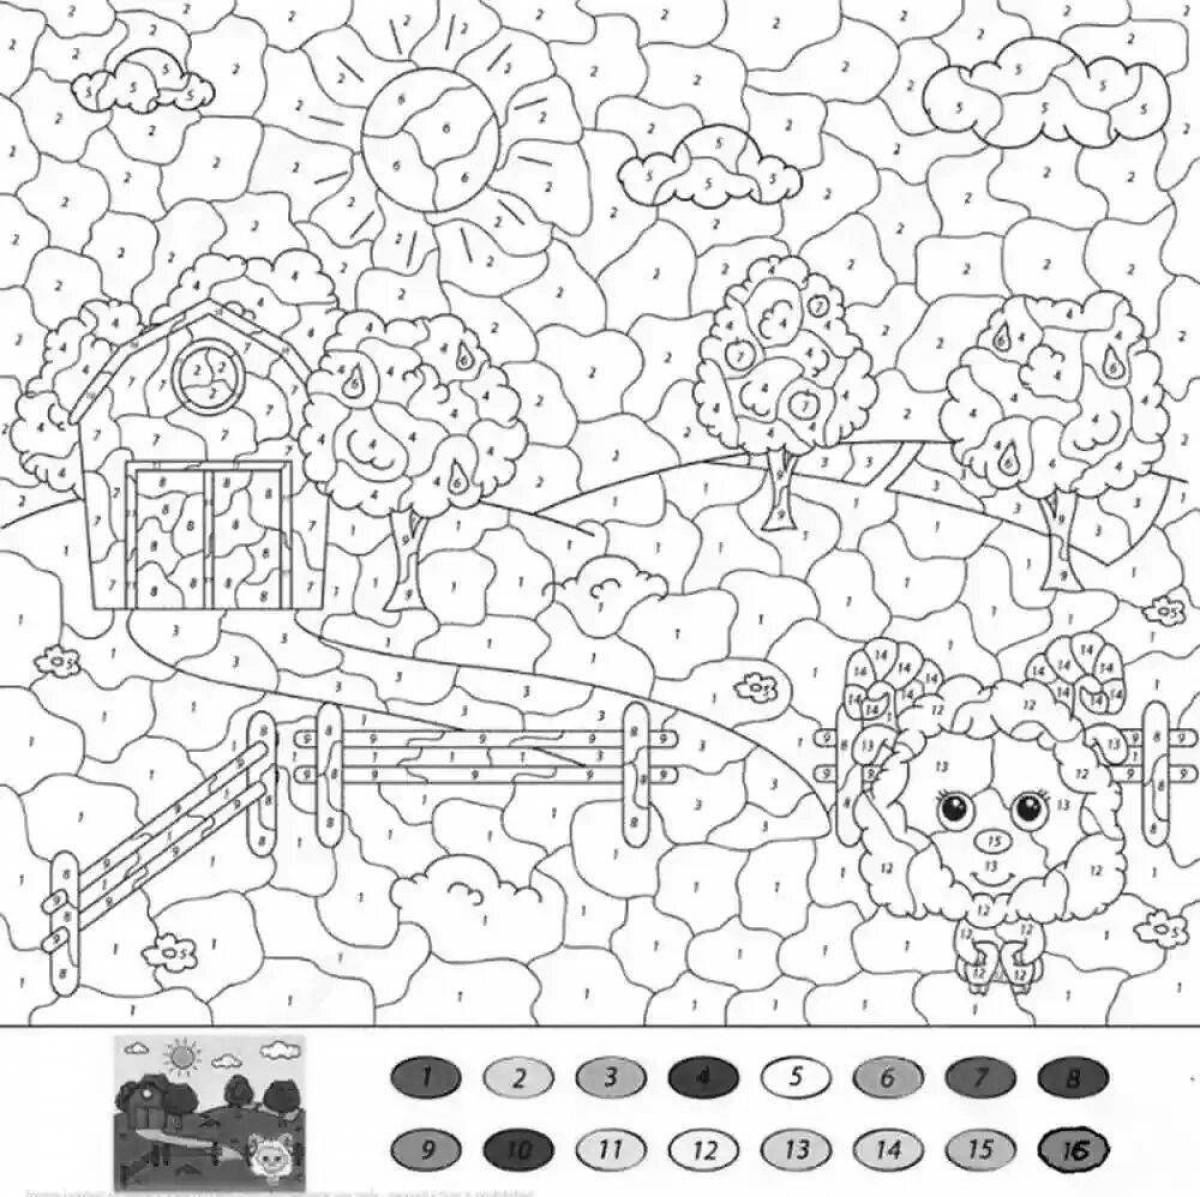 Stimulating coloring by numbers